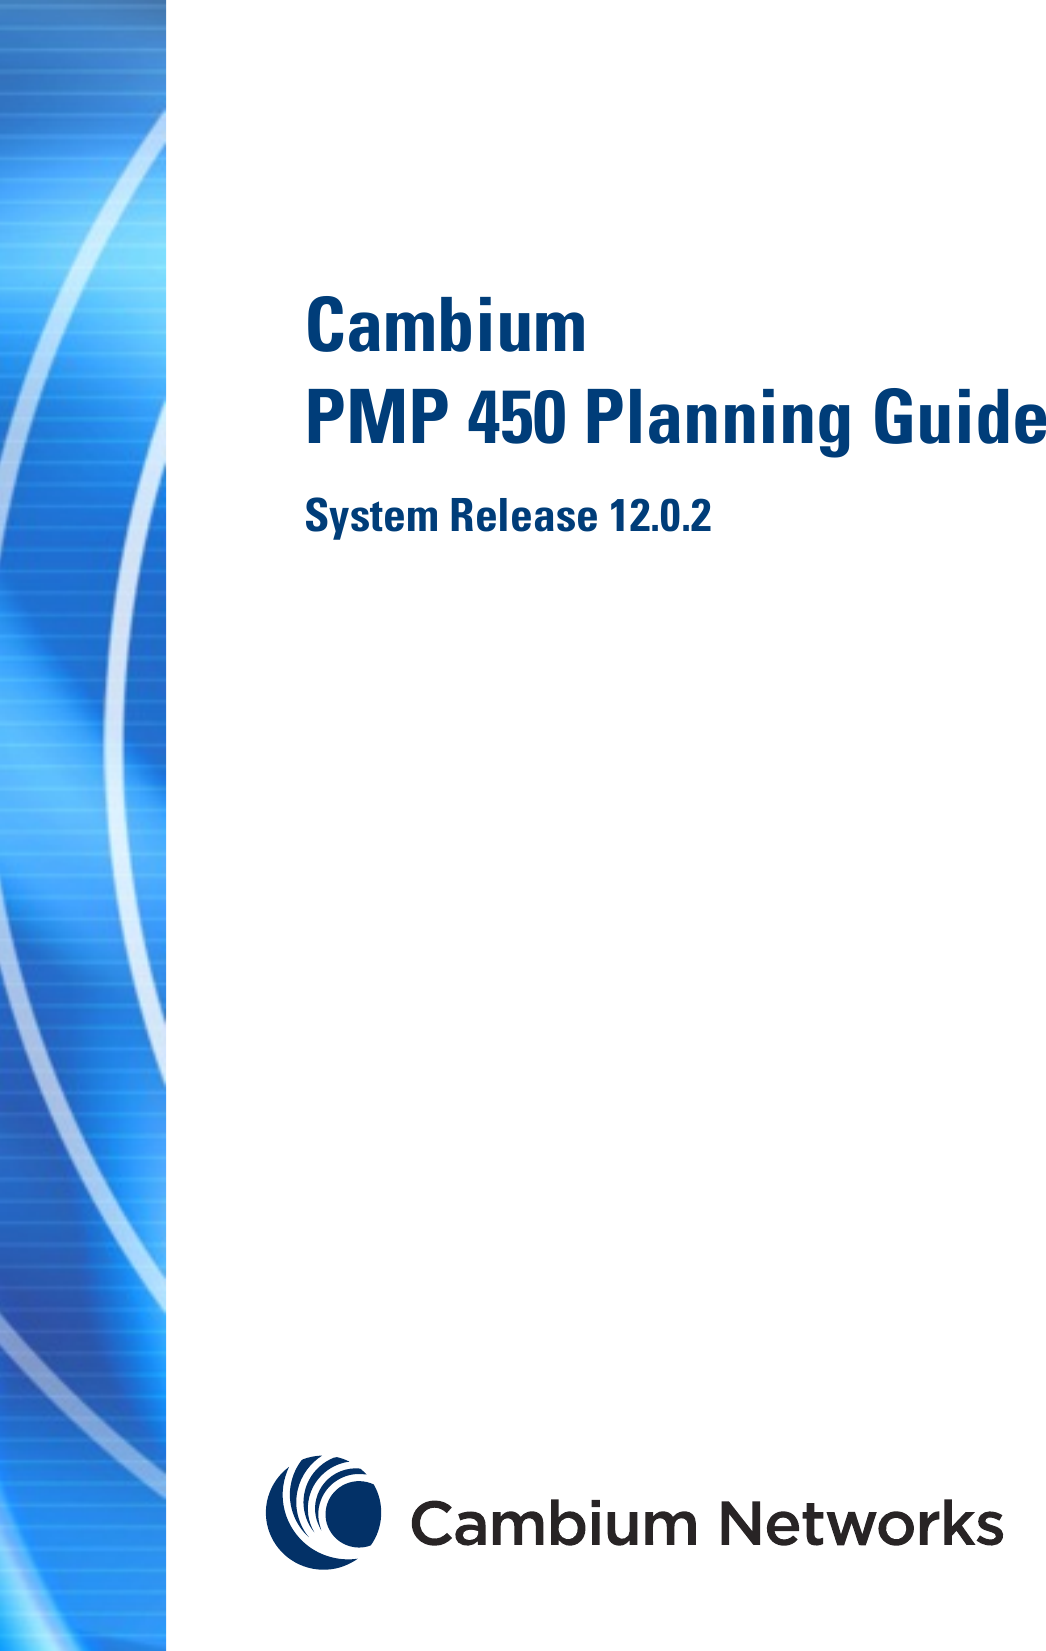       Cambium PMP 450 Planning Guide System Release 12.0.2     